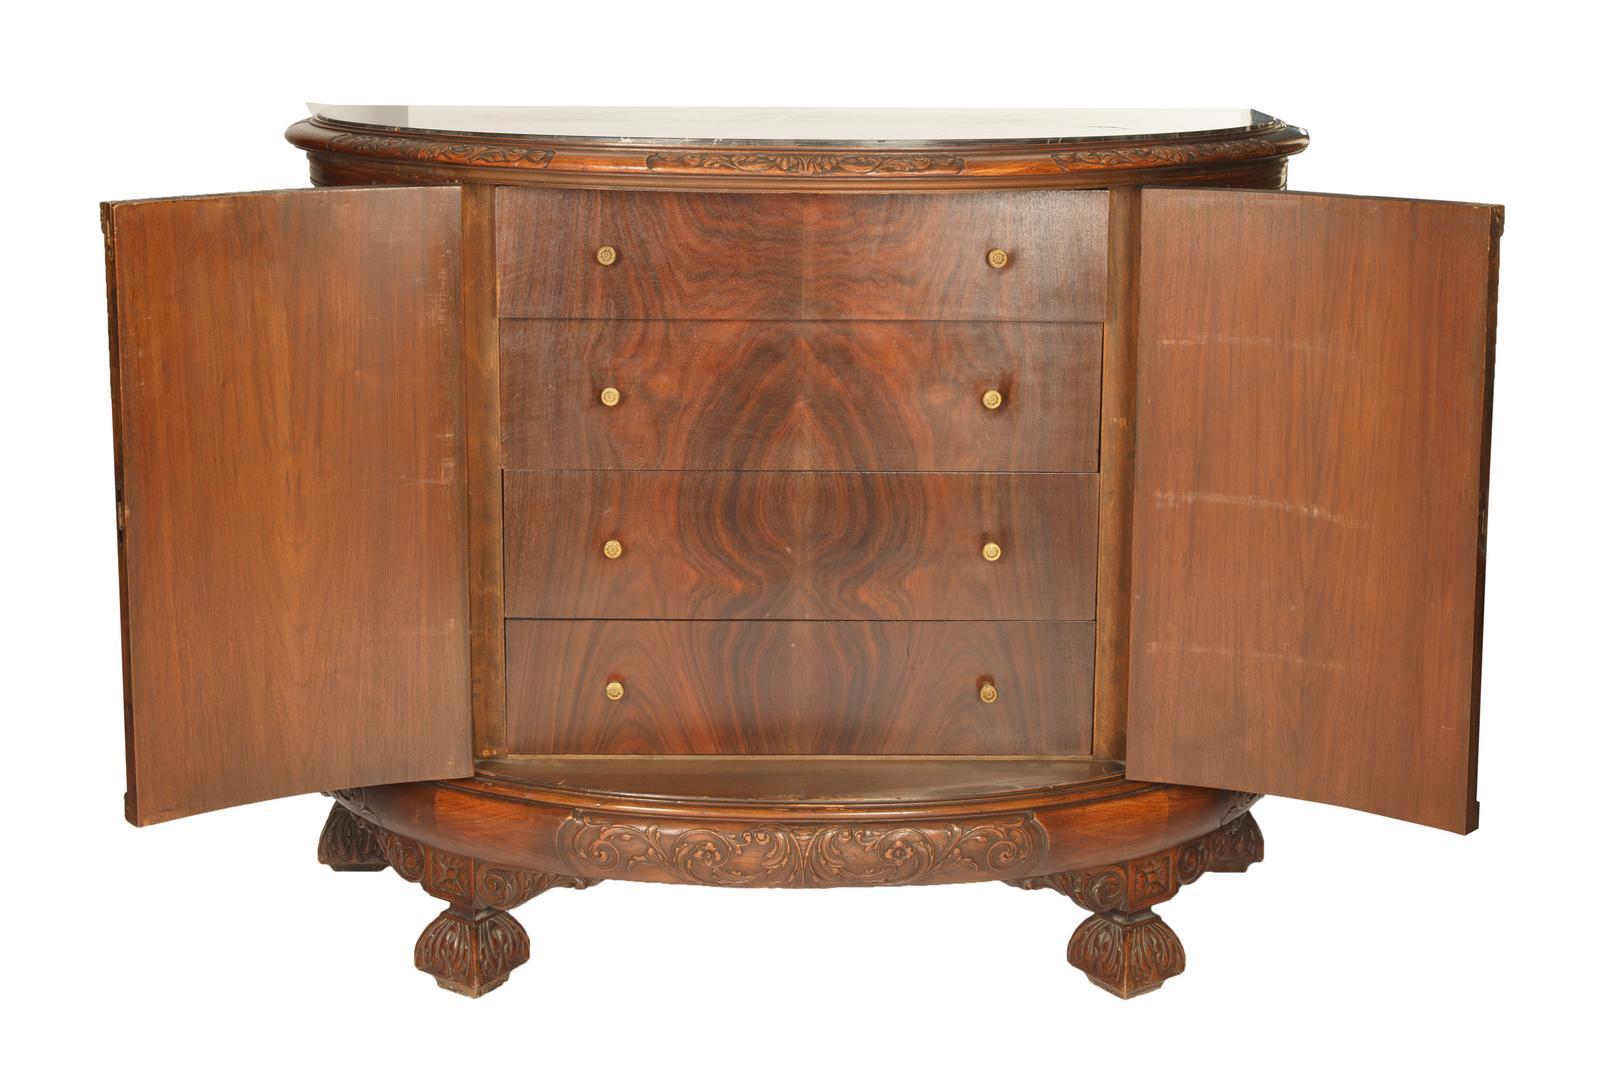 Elevate your dining area with this 19th Century French Hand-Carved Mahogany Wood Demilune Shape Sideboard or Server, a stunning piece of furniture that reflects the elegance and craftsmanship of the 19th century. The demilune shape of this sideboard